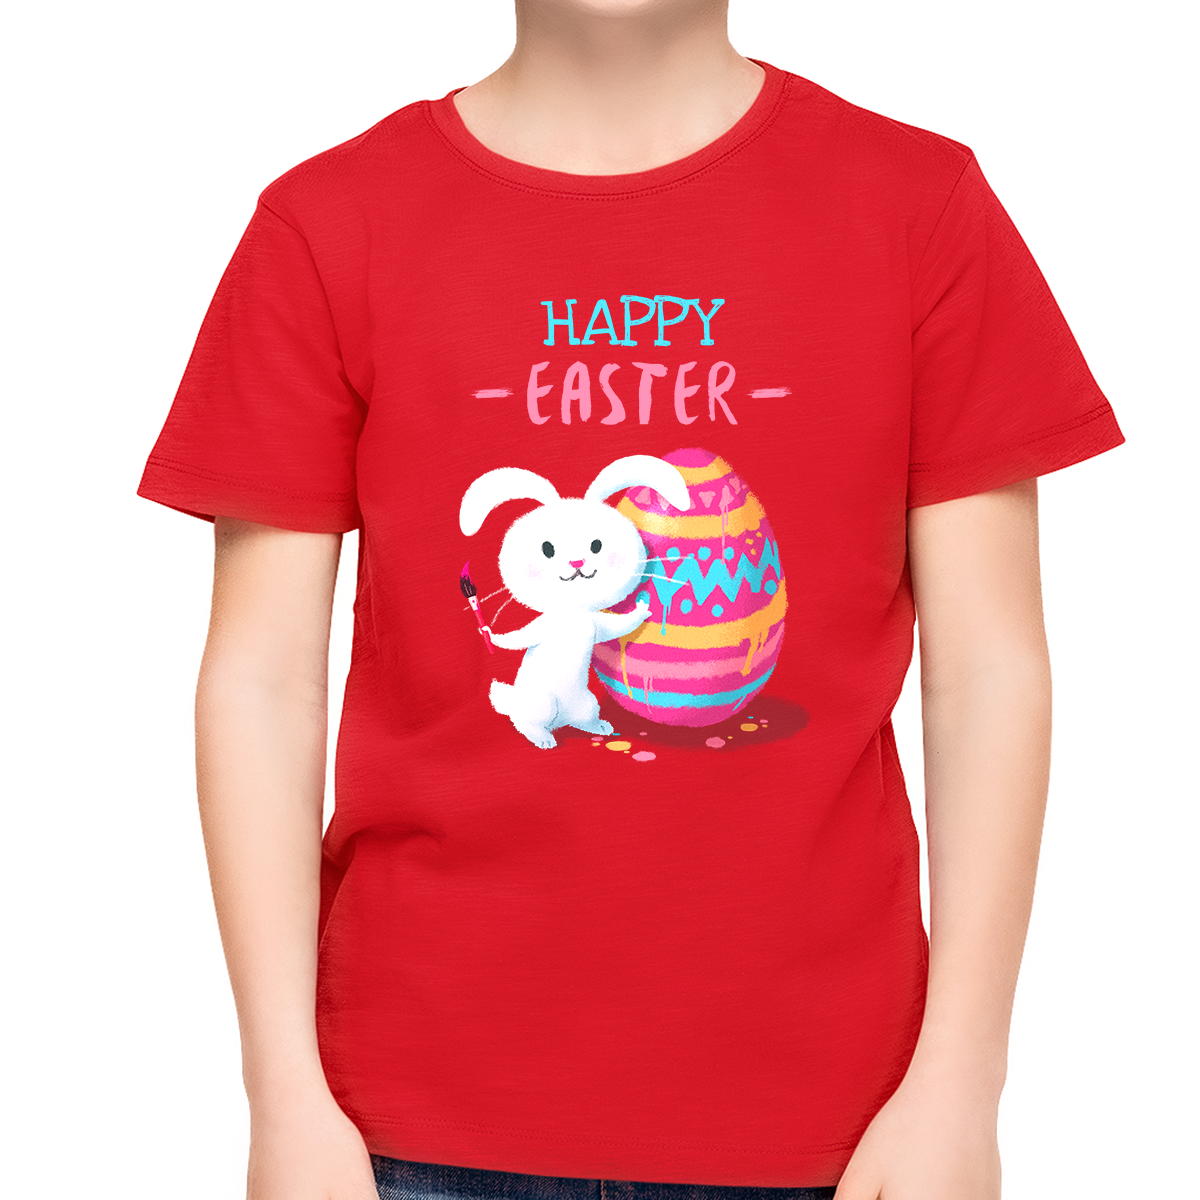 Easter Shirts for Boys Kids Easter Outfits Easter Egg Easter Shirts for Boys